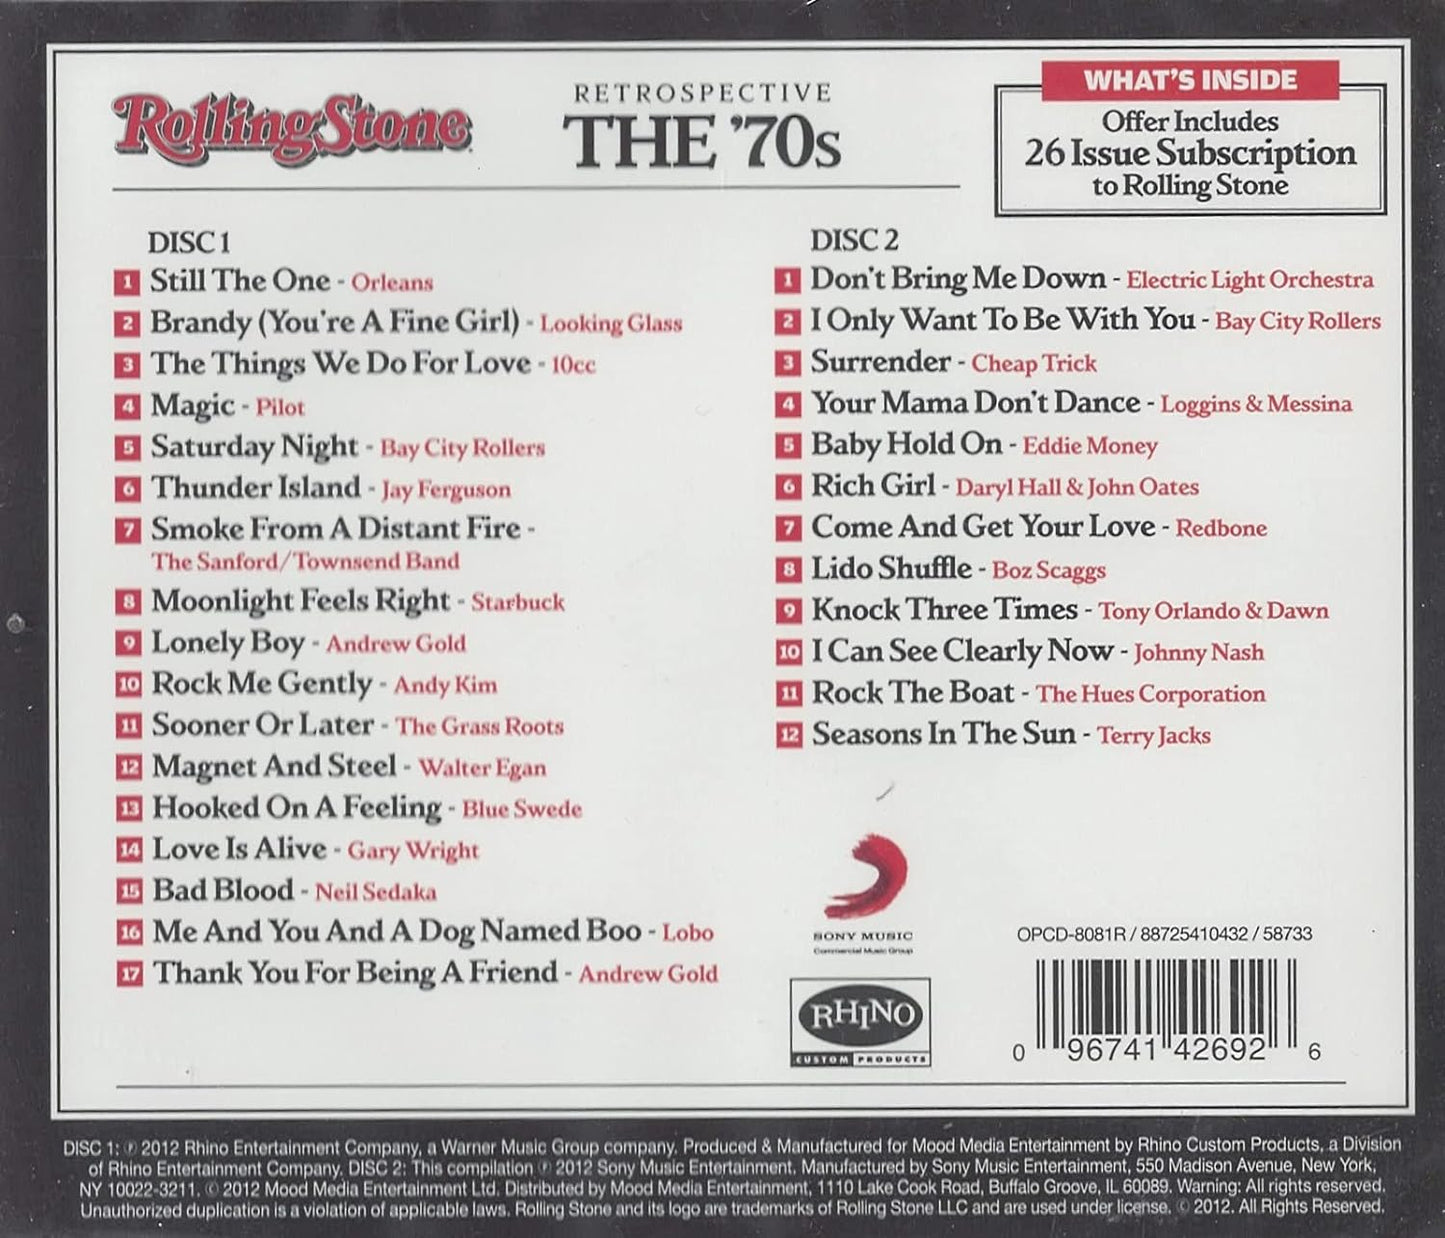 Rolling Stone: Retrospective The 70s (2CD) [audioCD] Various Artists